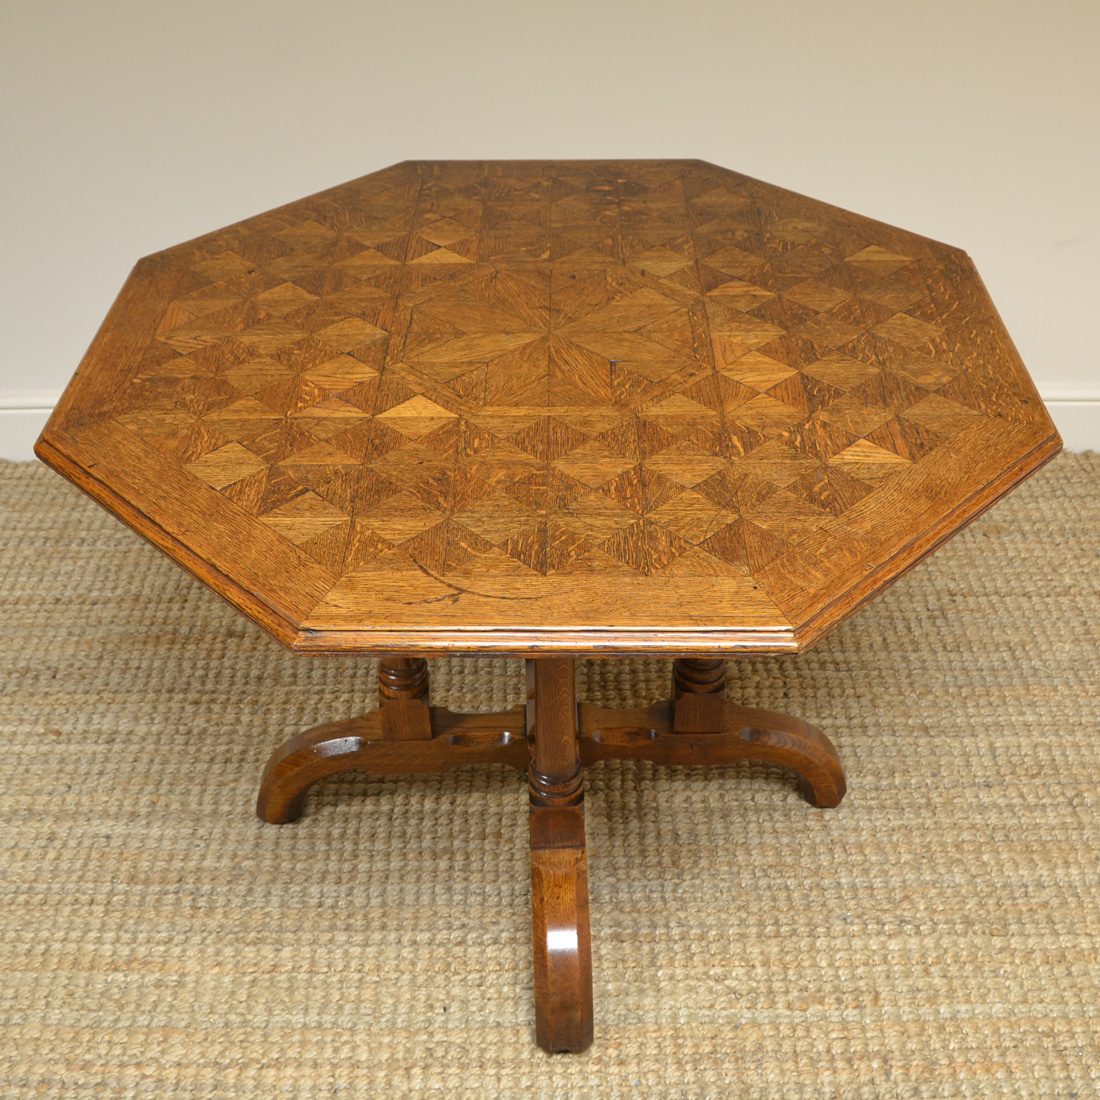 Victorian Arts & Crafts Parquetry Oak Antique Centre Table by James Shoolbred